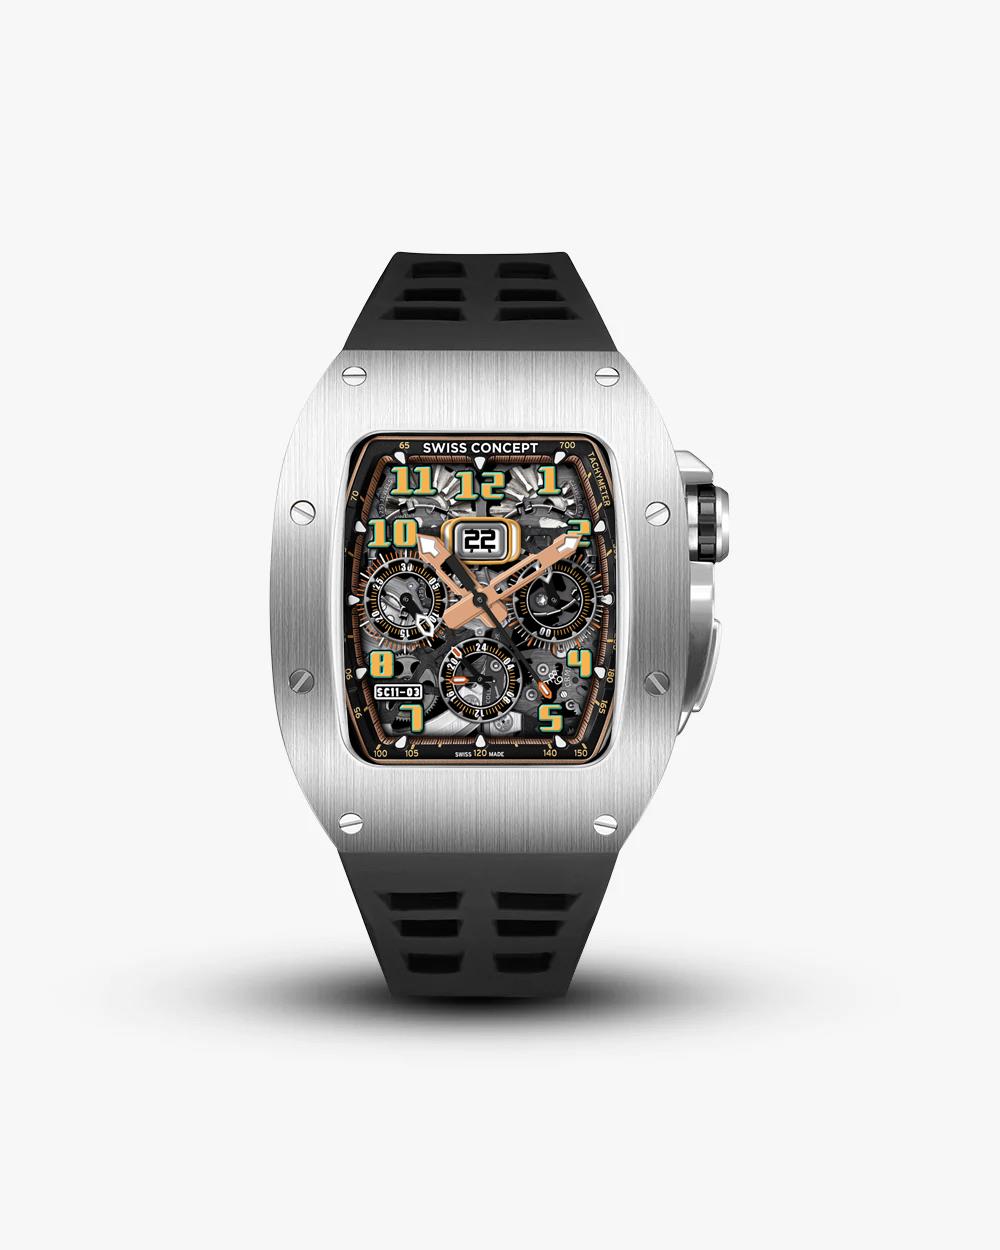 Swiss Concept Racing Classic Edition Stainless Steel Apple Watch Case - Swiss Design